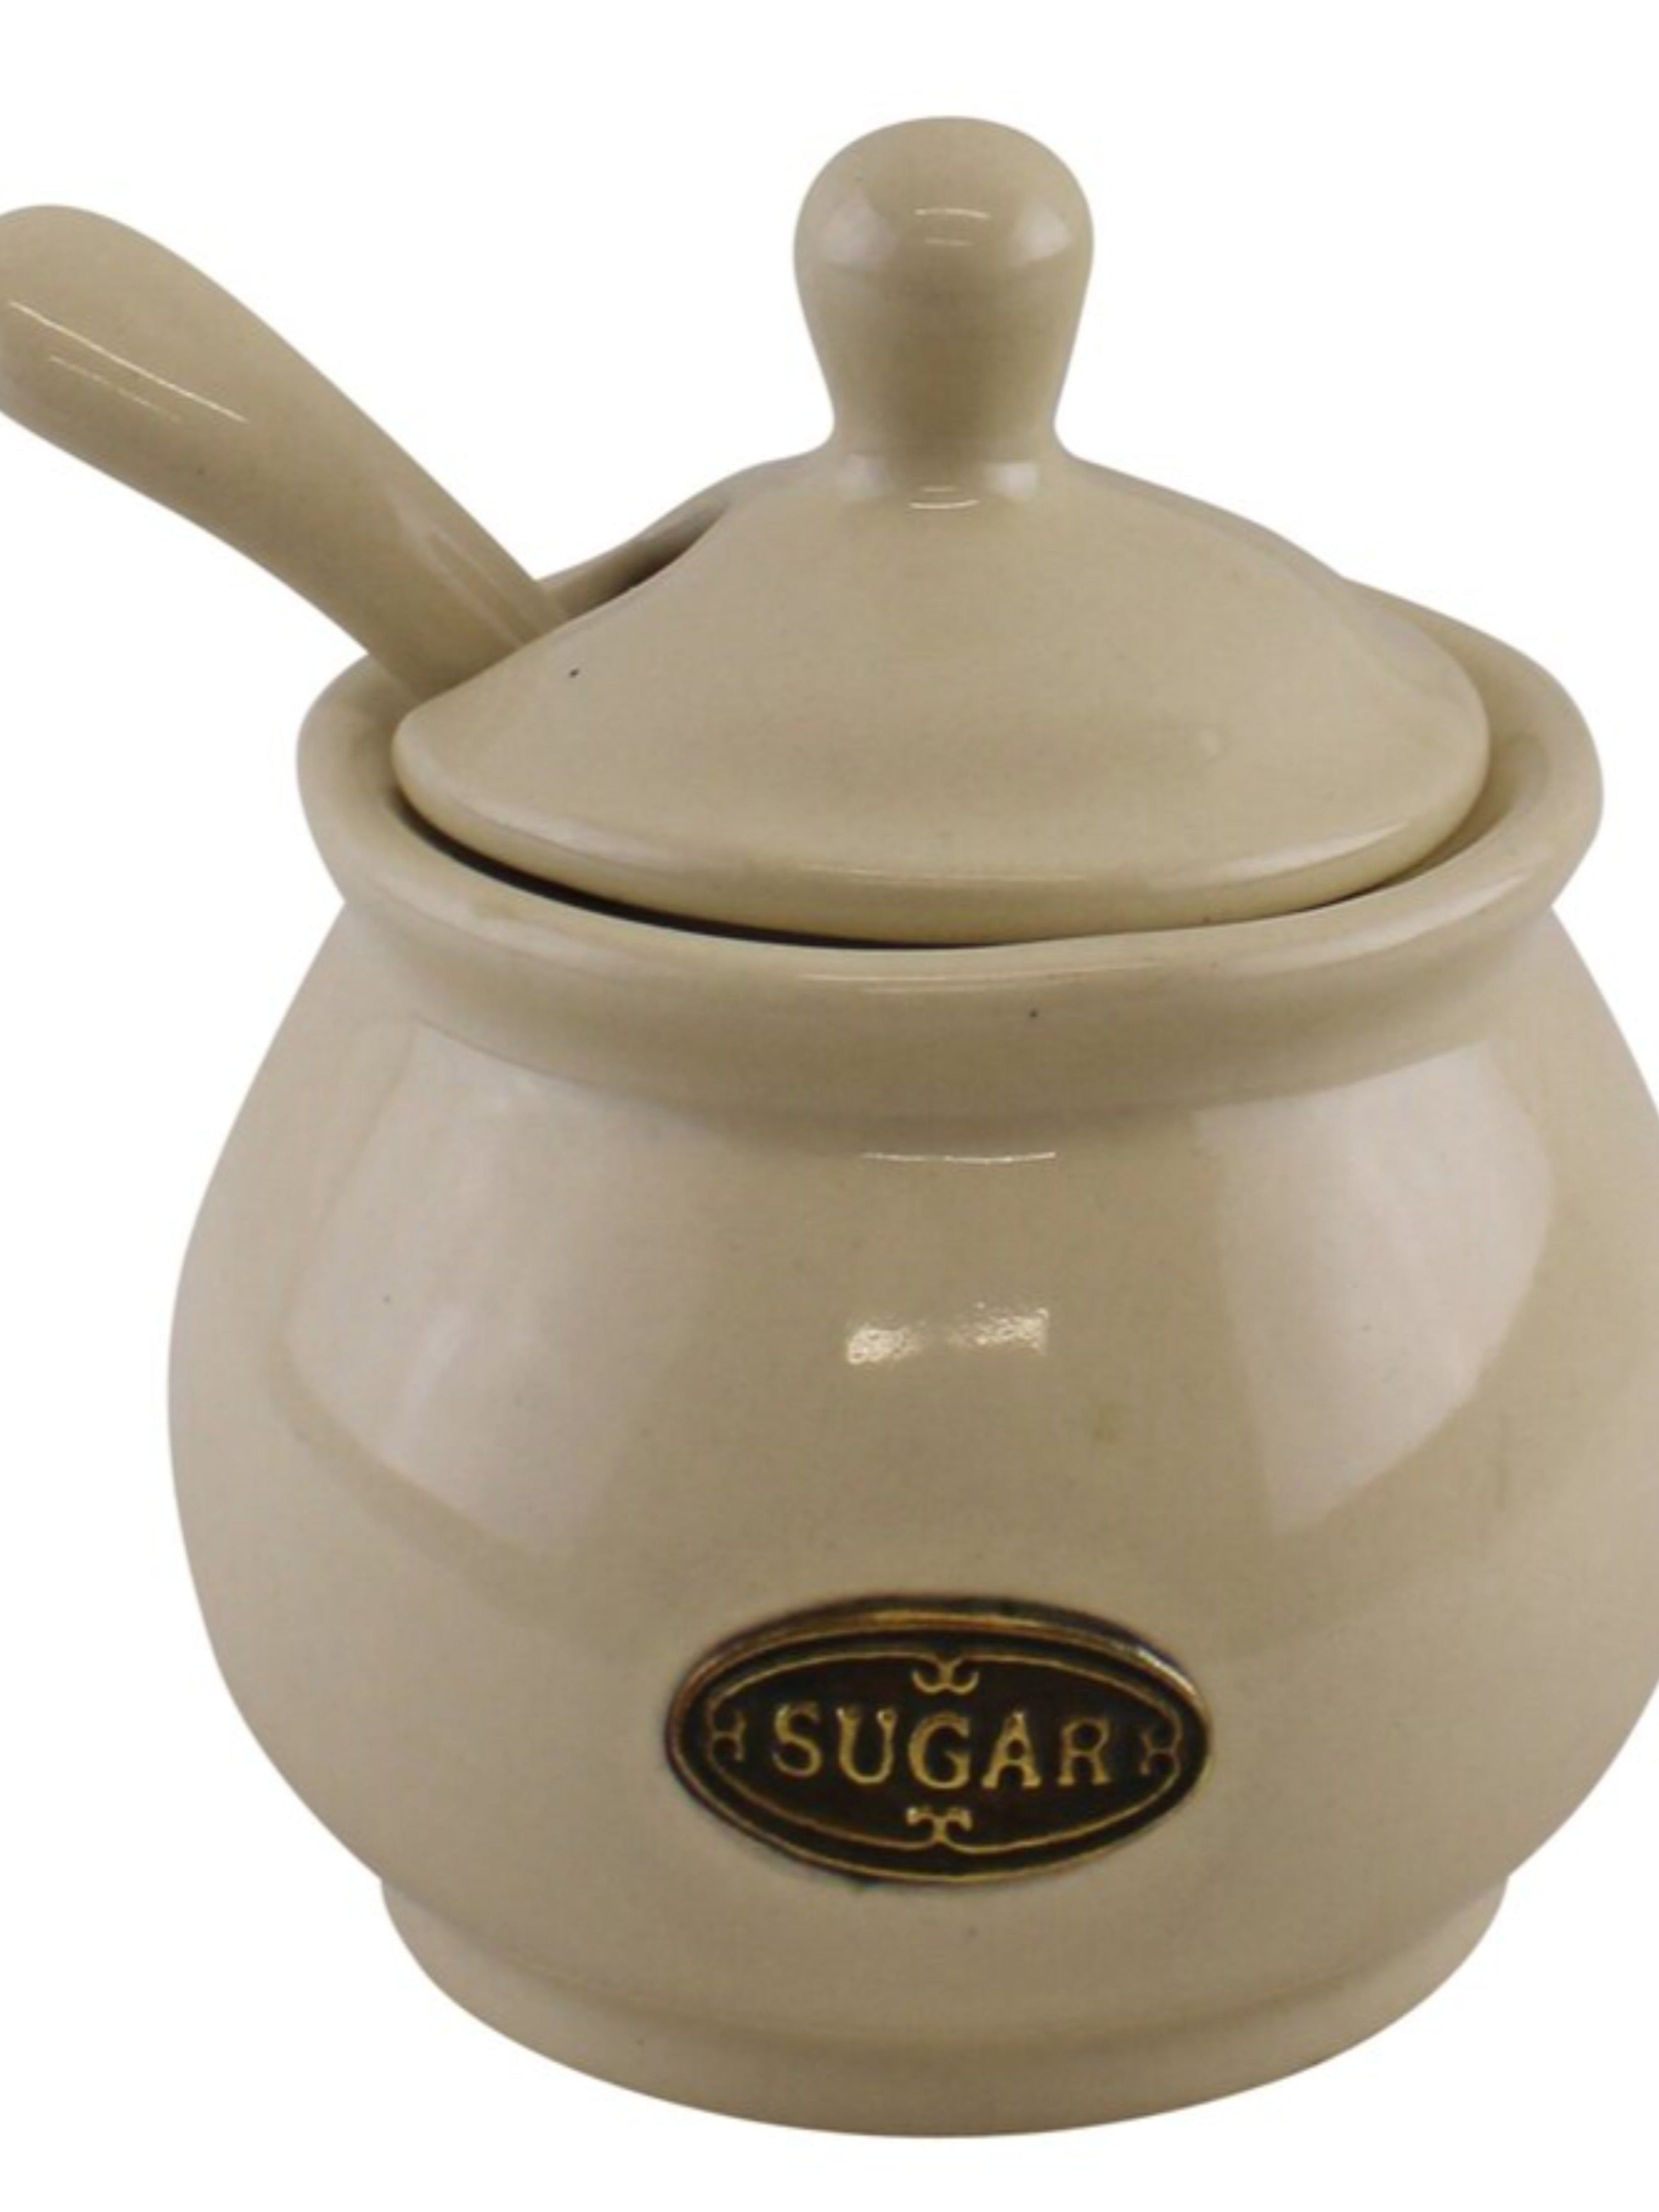 Country Cottage Cream Ceramic Sugar Bowl With Lid & Spoon